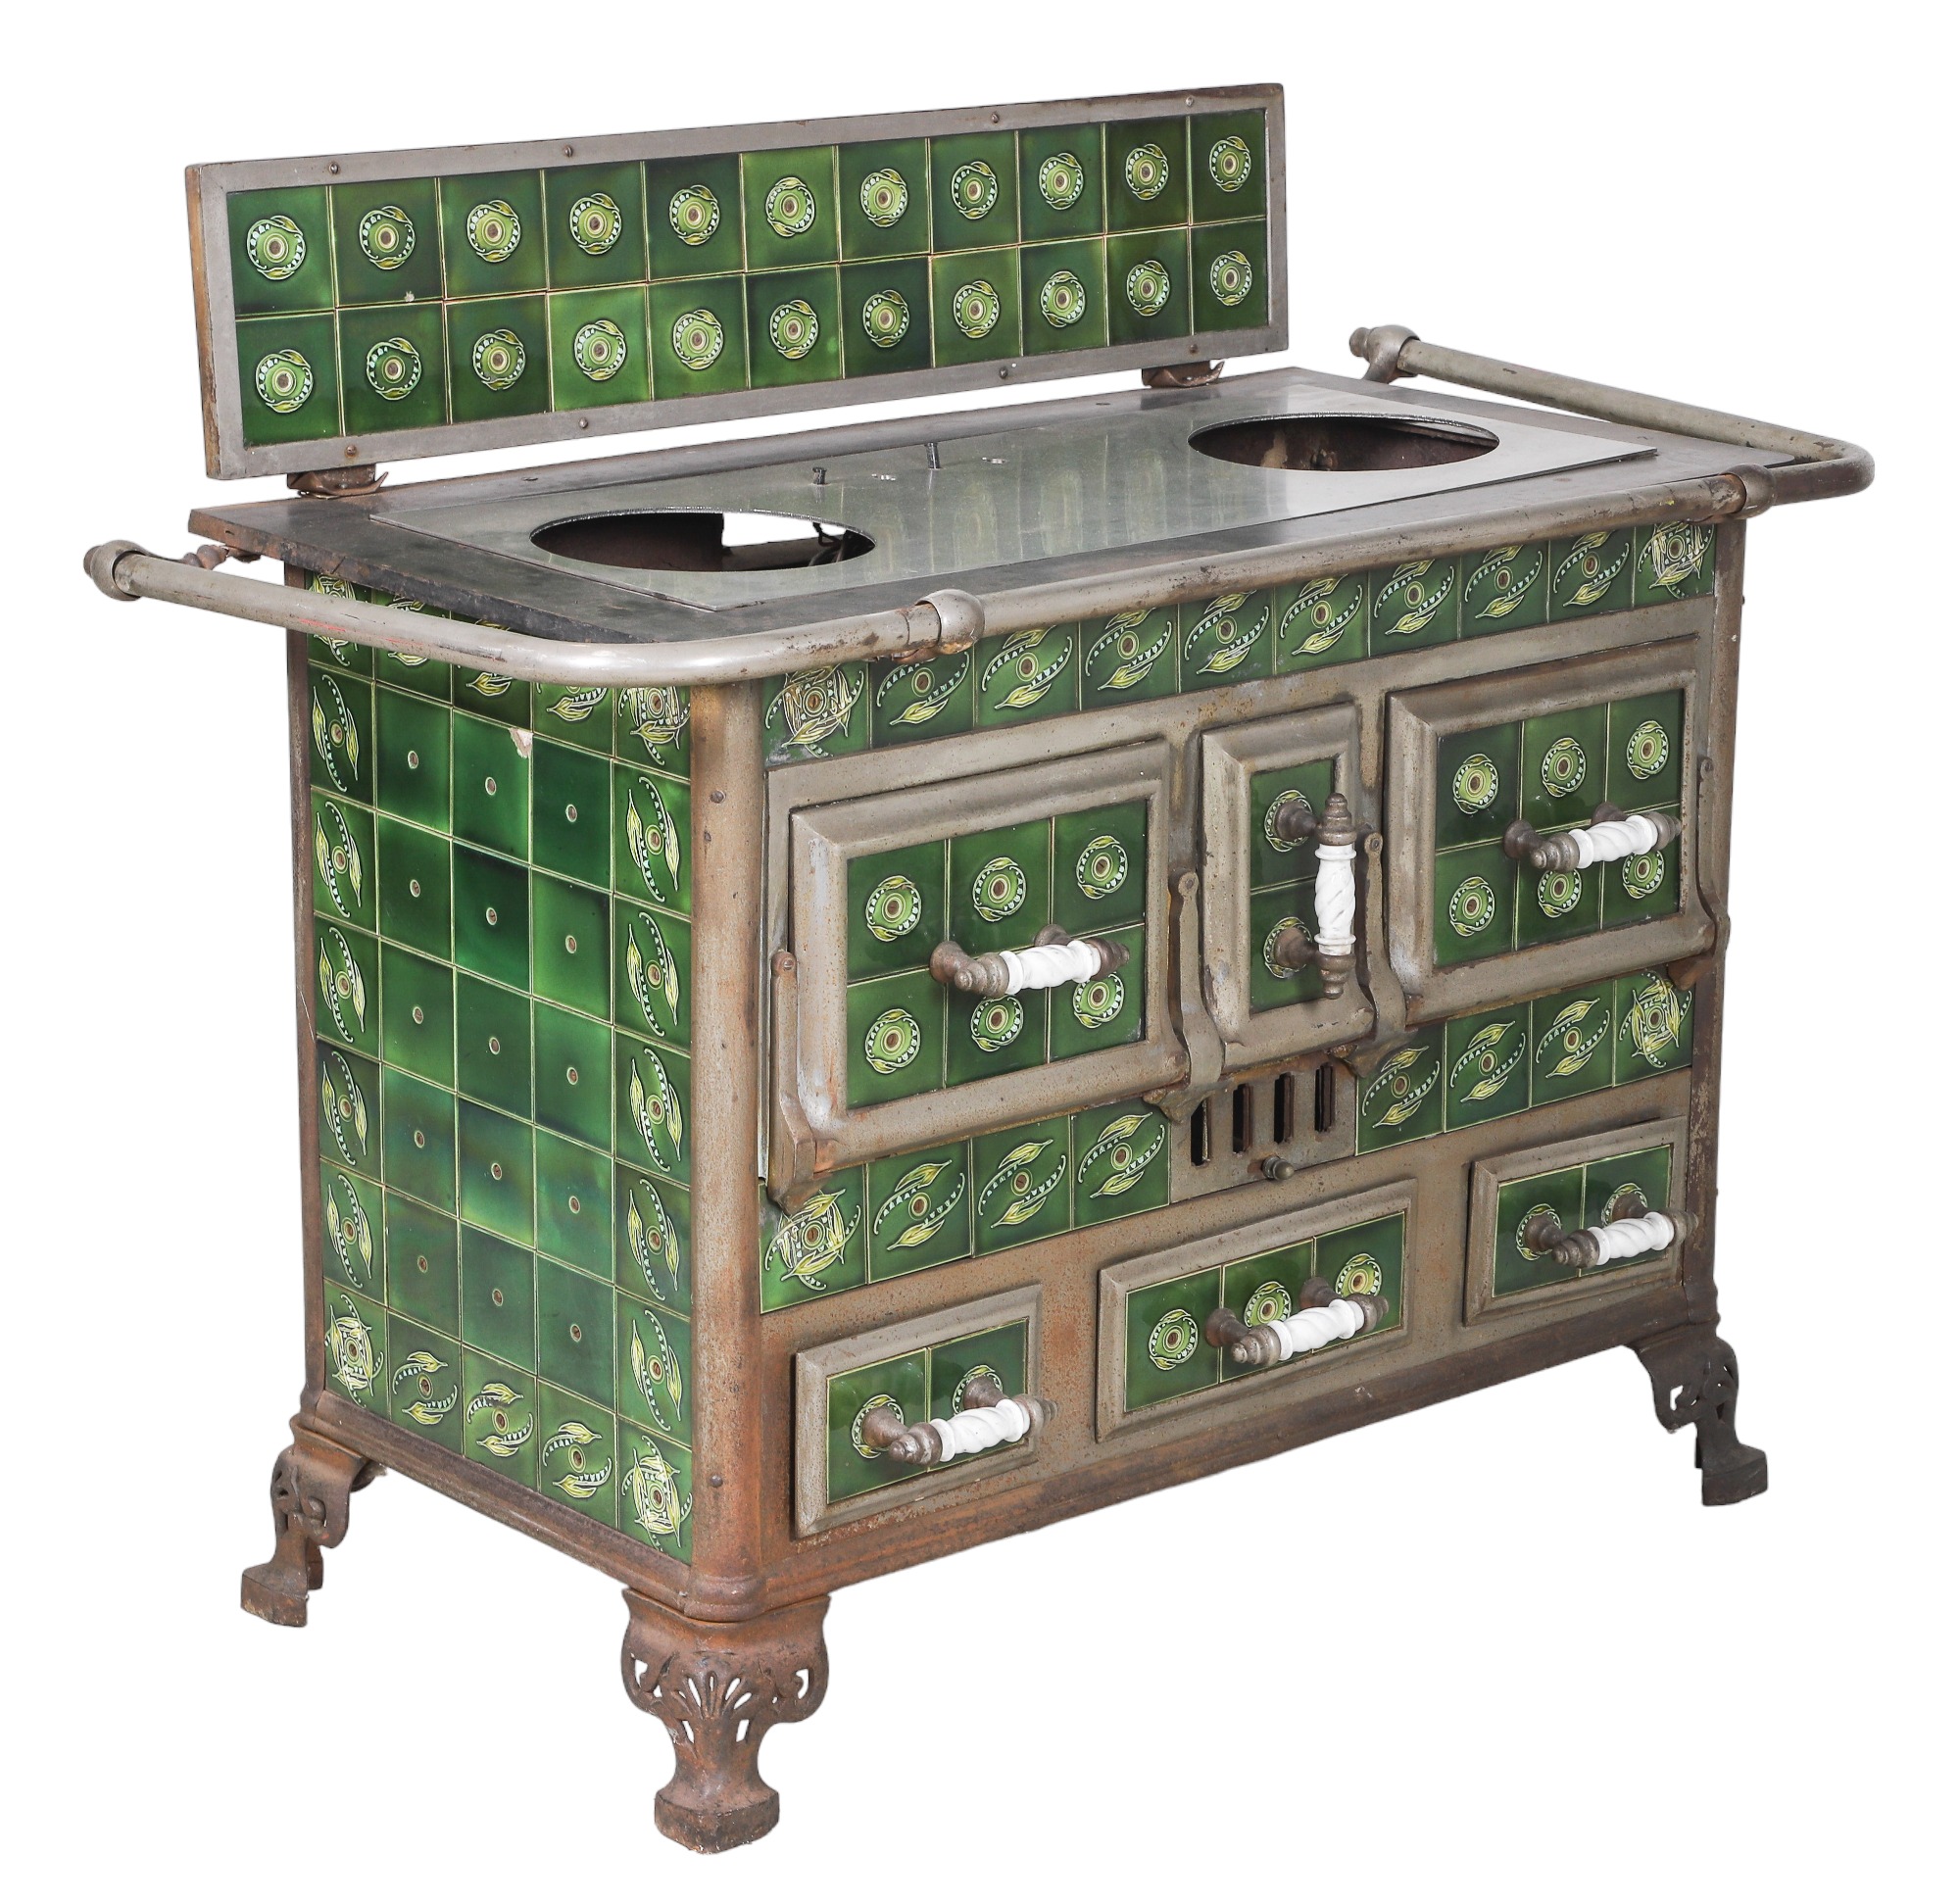 Iron and tiled stove green flower 3ca531